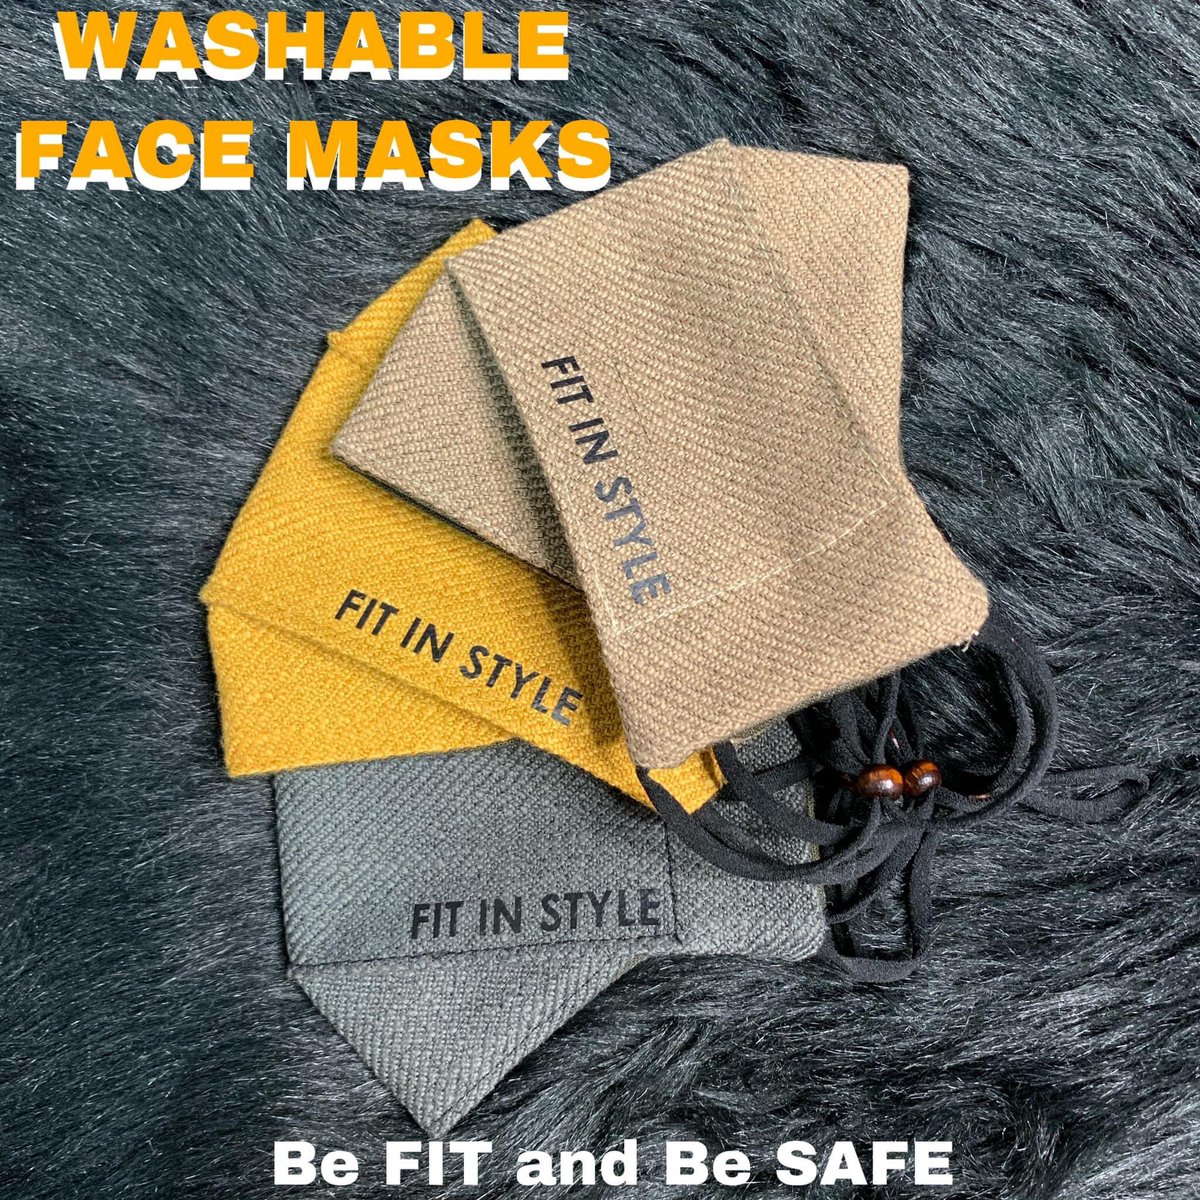 Washable face mask 😷 

Thank you Fit in Style KSA for fast and easy transactions. For order abd details please check their fb page. #washablefacemask #facemask 

facebook.com/Fit-In-Style-K…